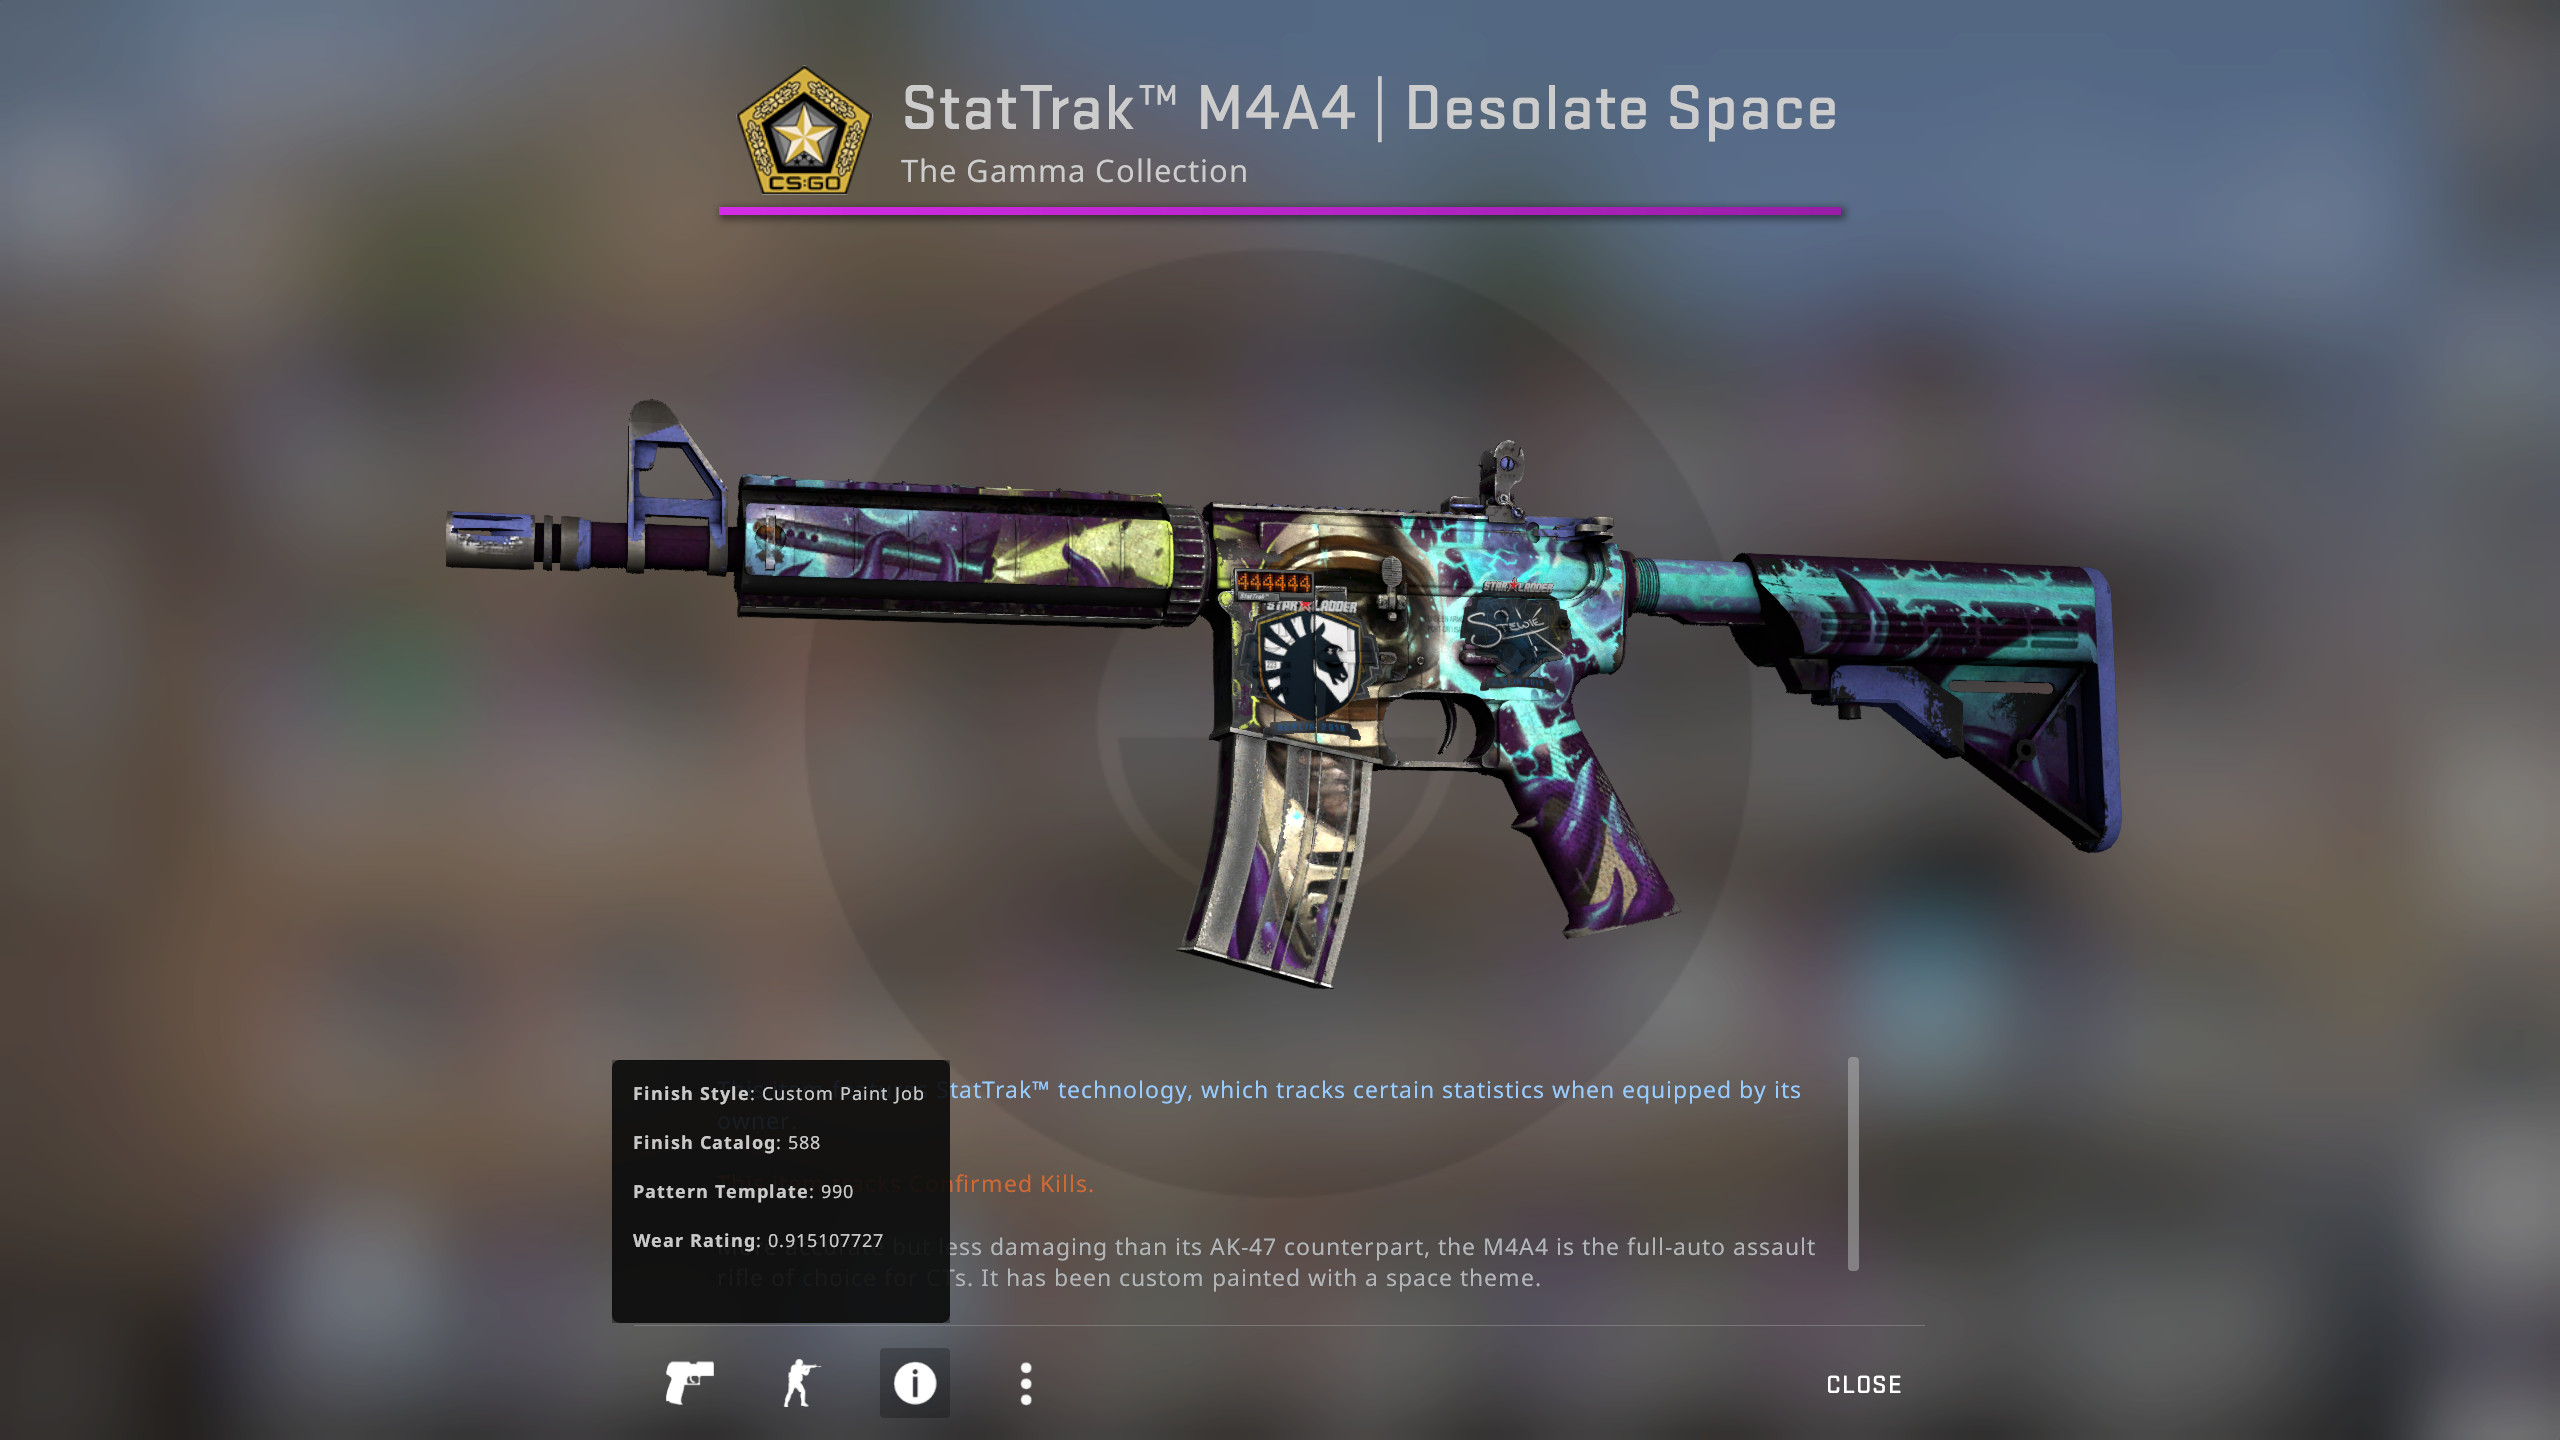 Sale/Trade] - CSGO Skins In-Game Currency Items | Carbonite